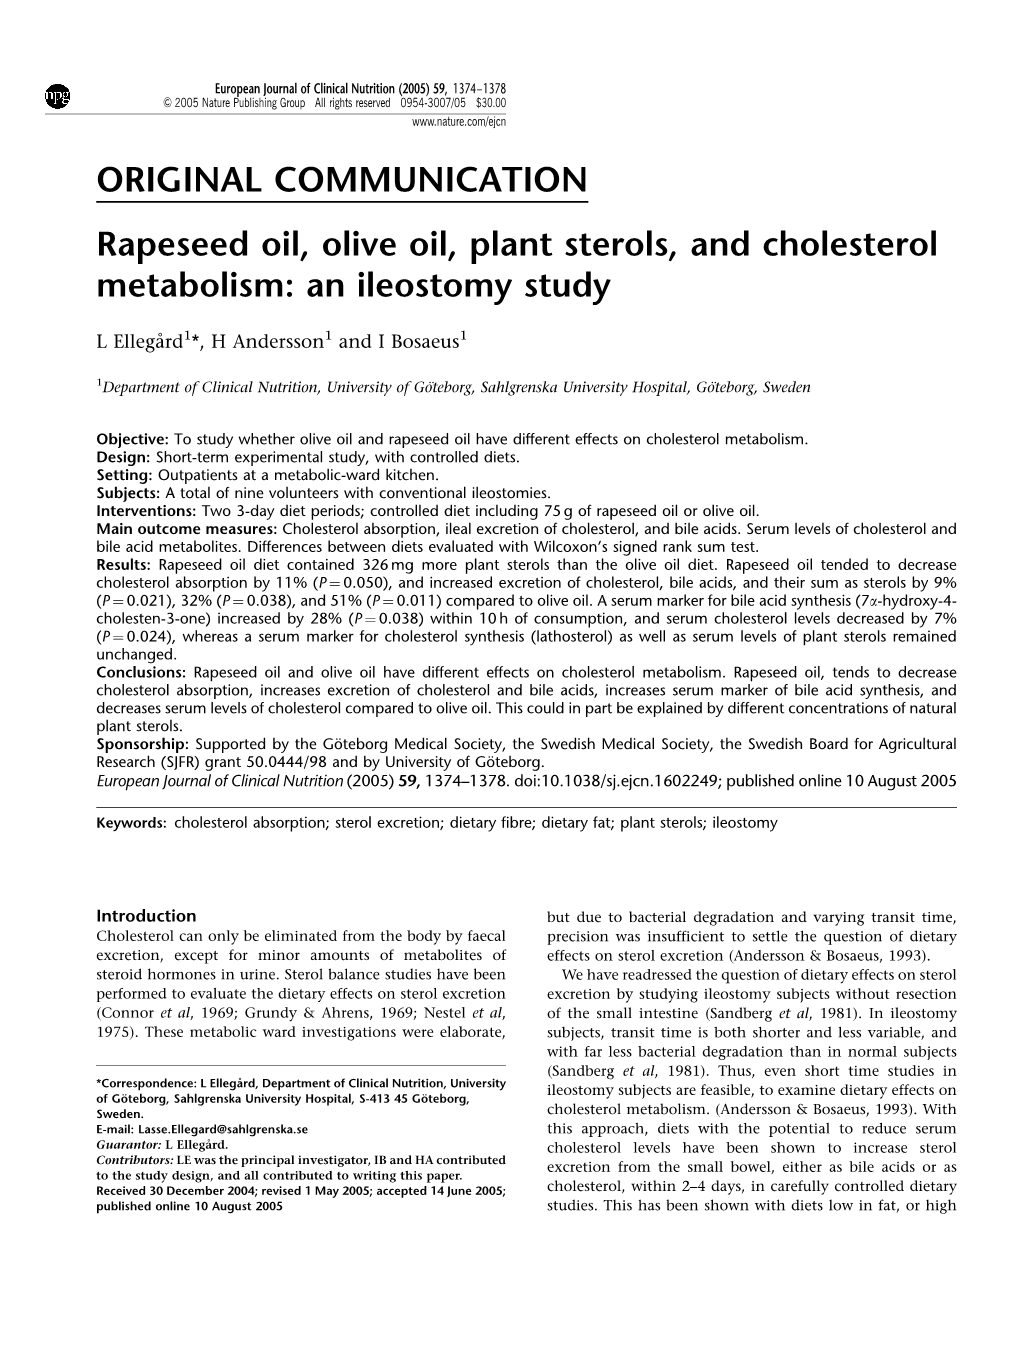 ORIGINAL COMMUNICATION Rapeseed Oil, Olive Oil, Plant Sterols, and Cholesterol Metabolism: an Ileostomy Study